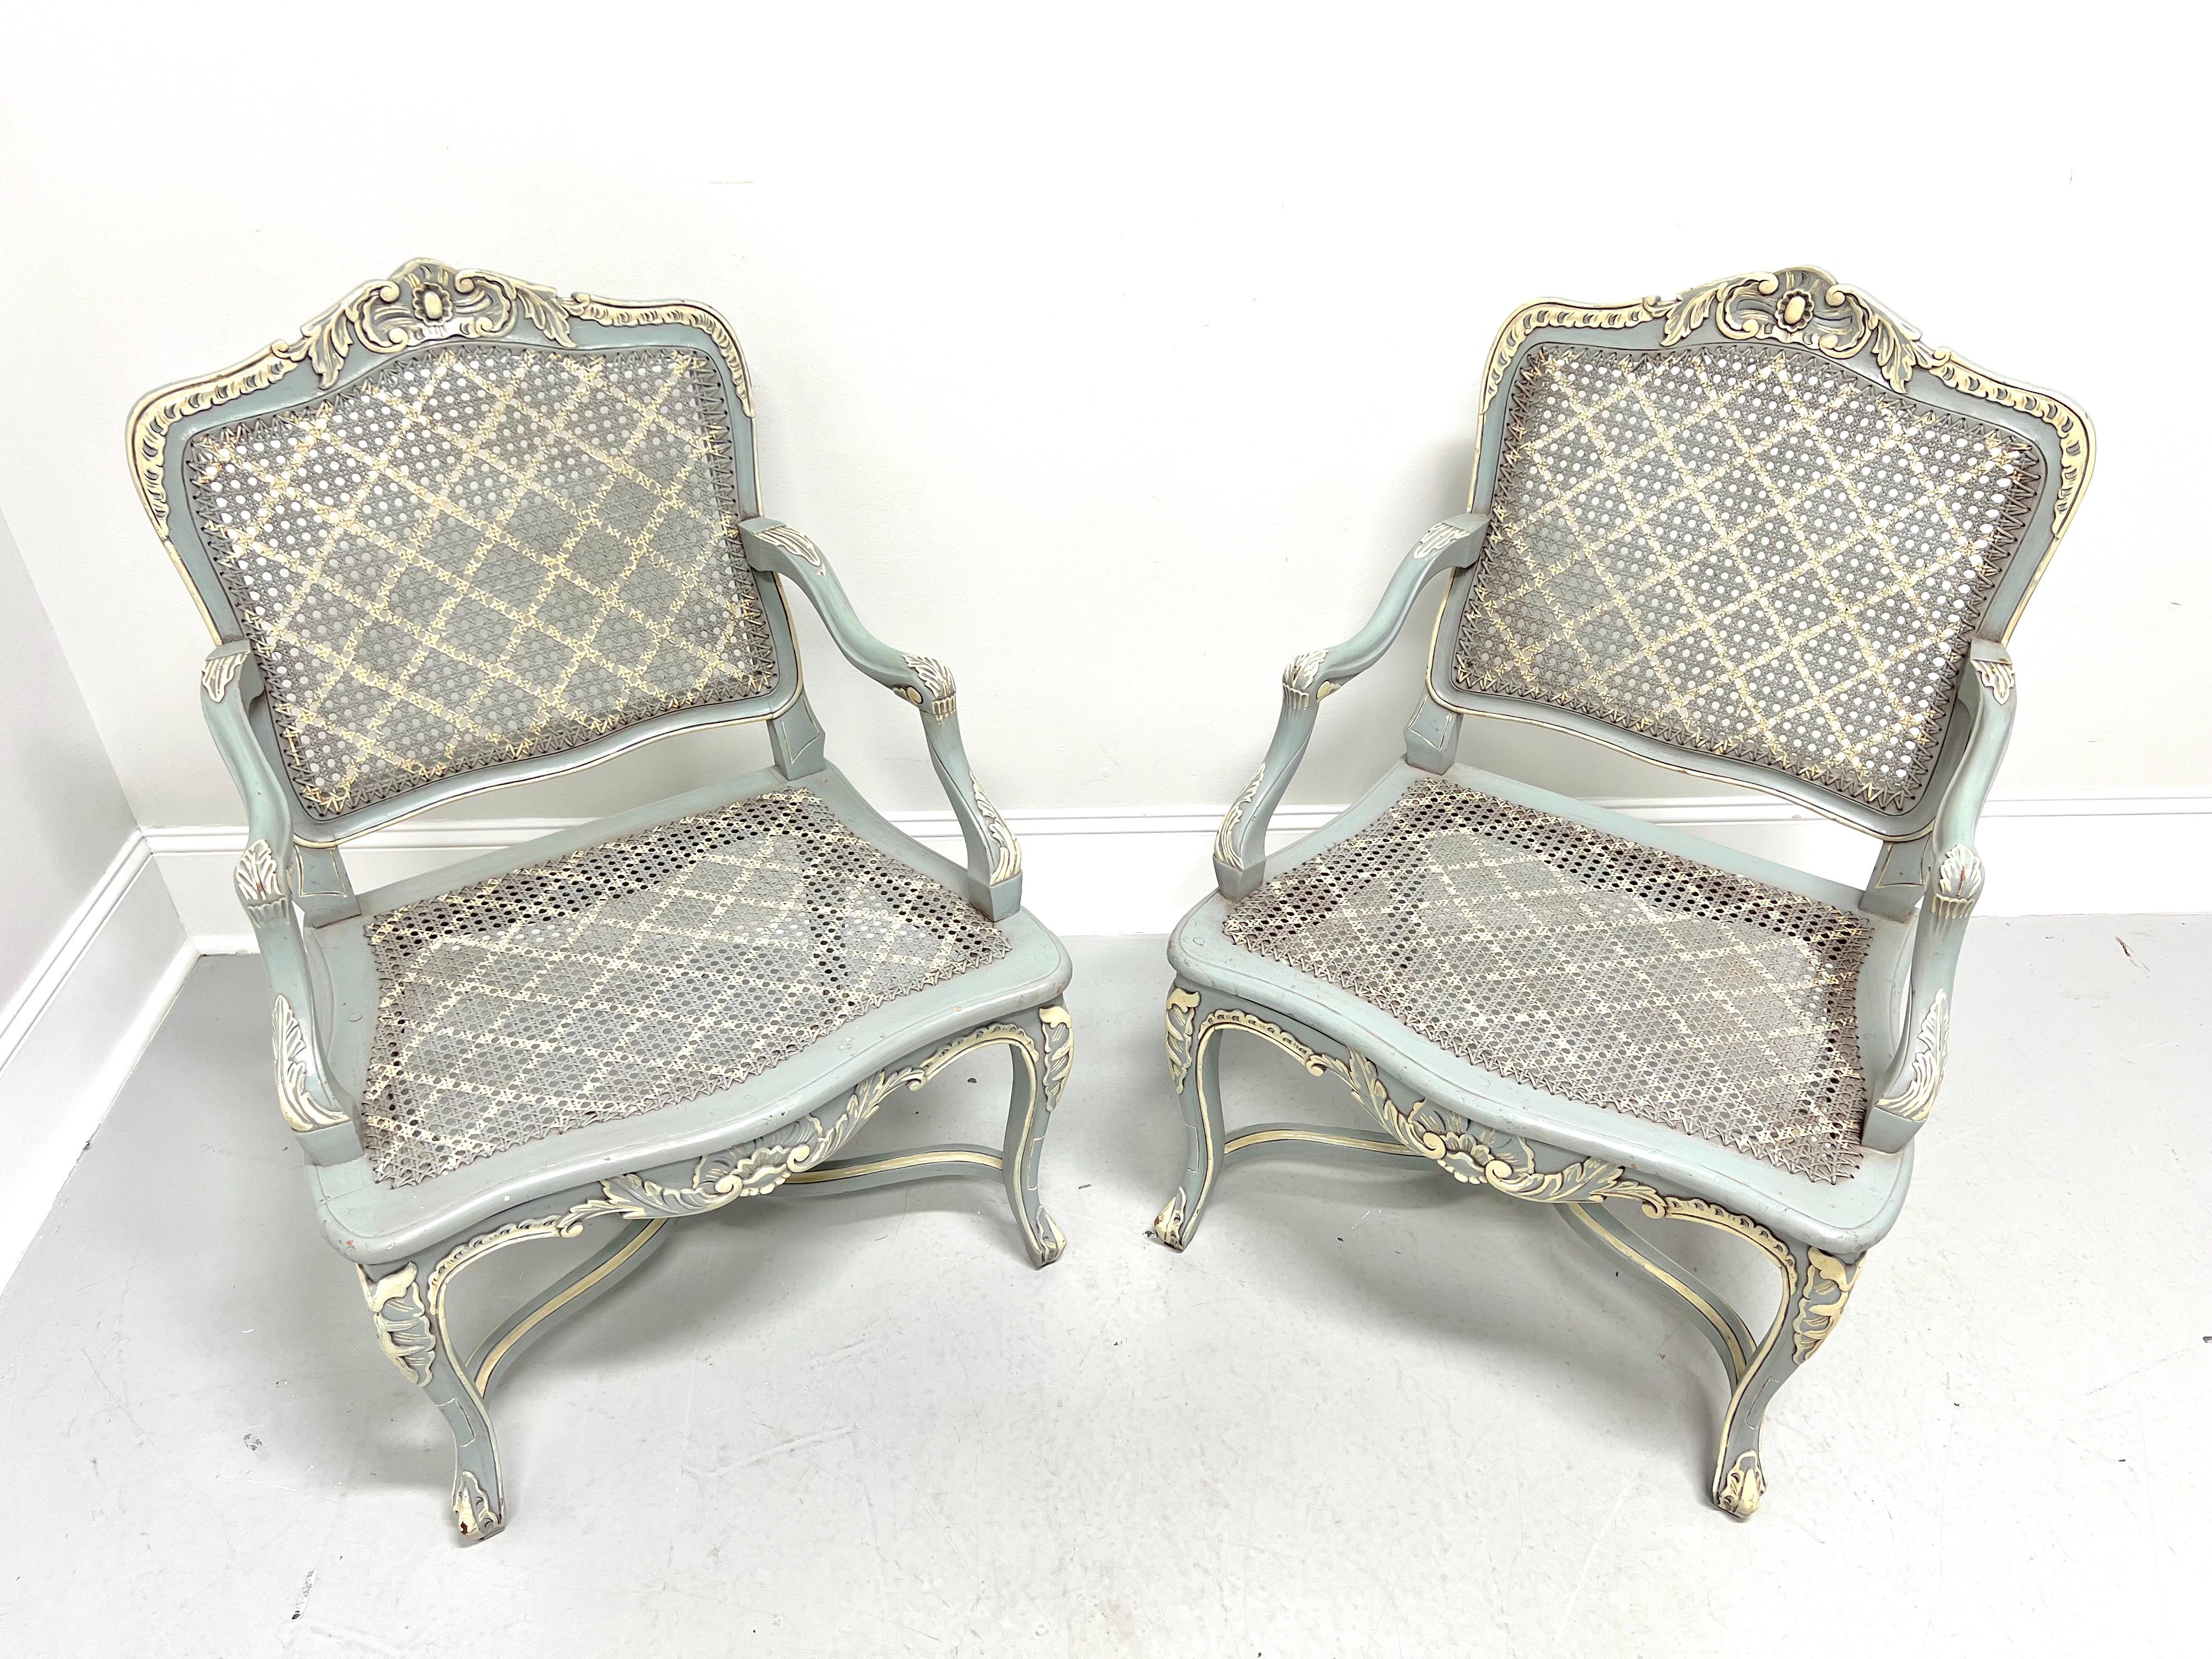 A pair of French Country Louis XV style armchairs, unbranded. Solid wood with a distressed painted finish of pale blue & ivory colors, decoratively embellished crest rail, woven caned backs, curved downward arms with embellished hand rest & arm